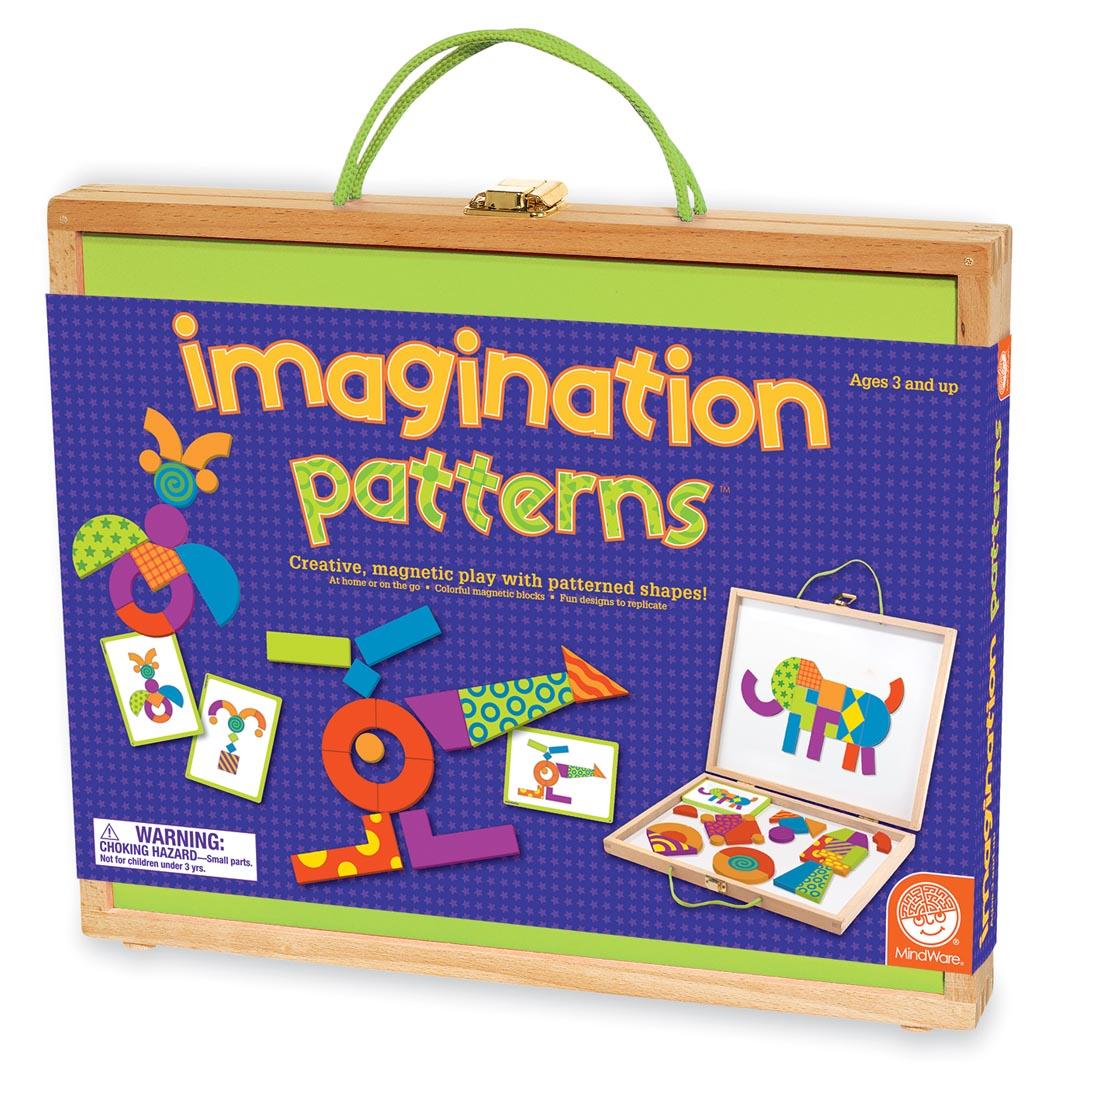 Imagination Patterns Magnetic Playboard